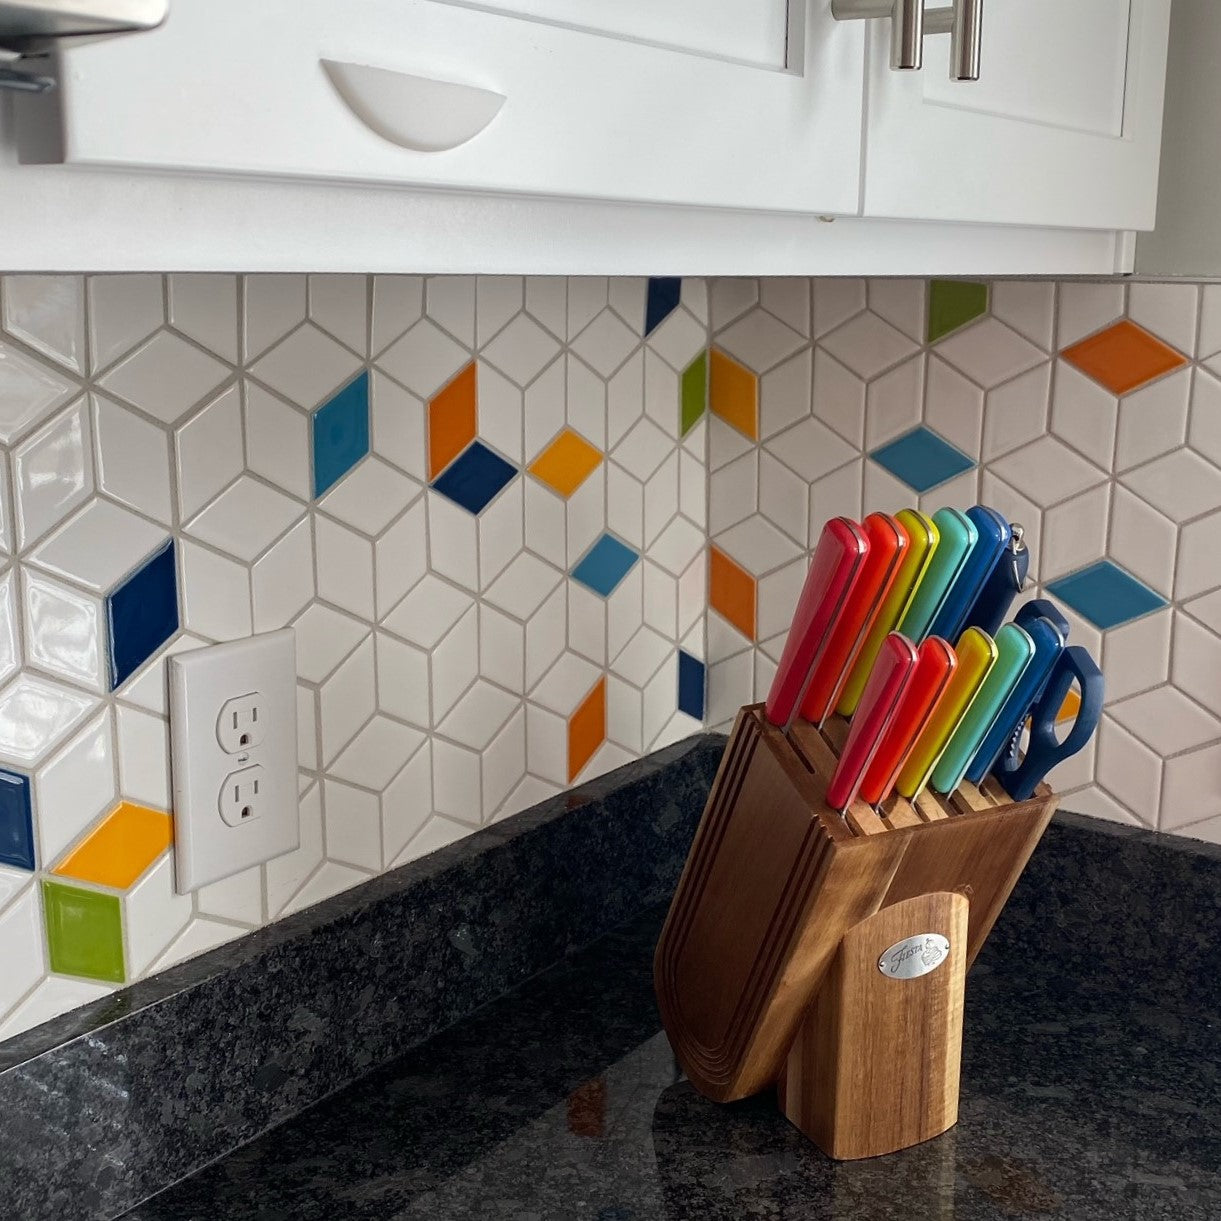 Modwalls Clayhaus Handmade Ceramic Mosaic Tile | DIamond in Multicolor | Colorful Modern tile for backsplashes, kitchens, bathrooms, showers & feature areas. 